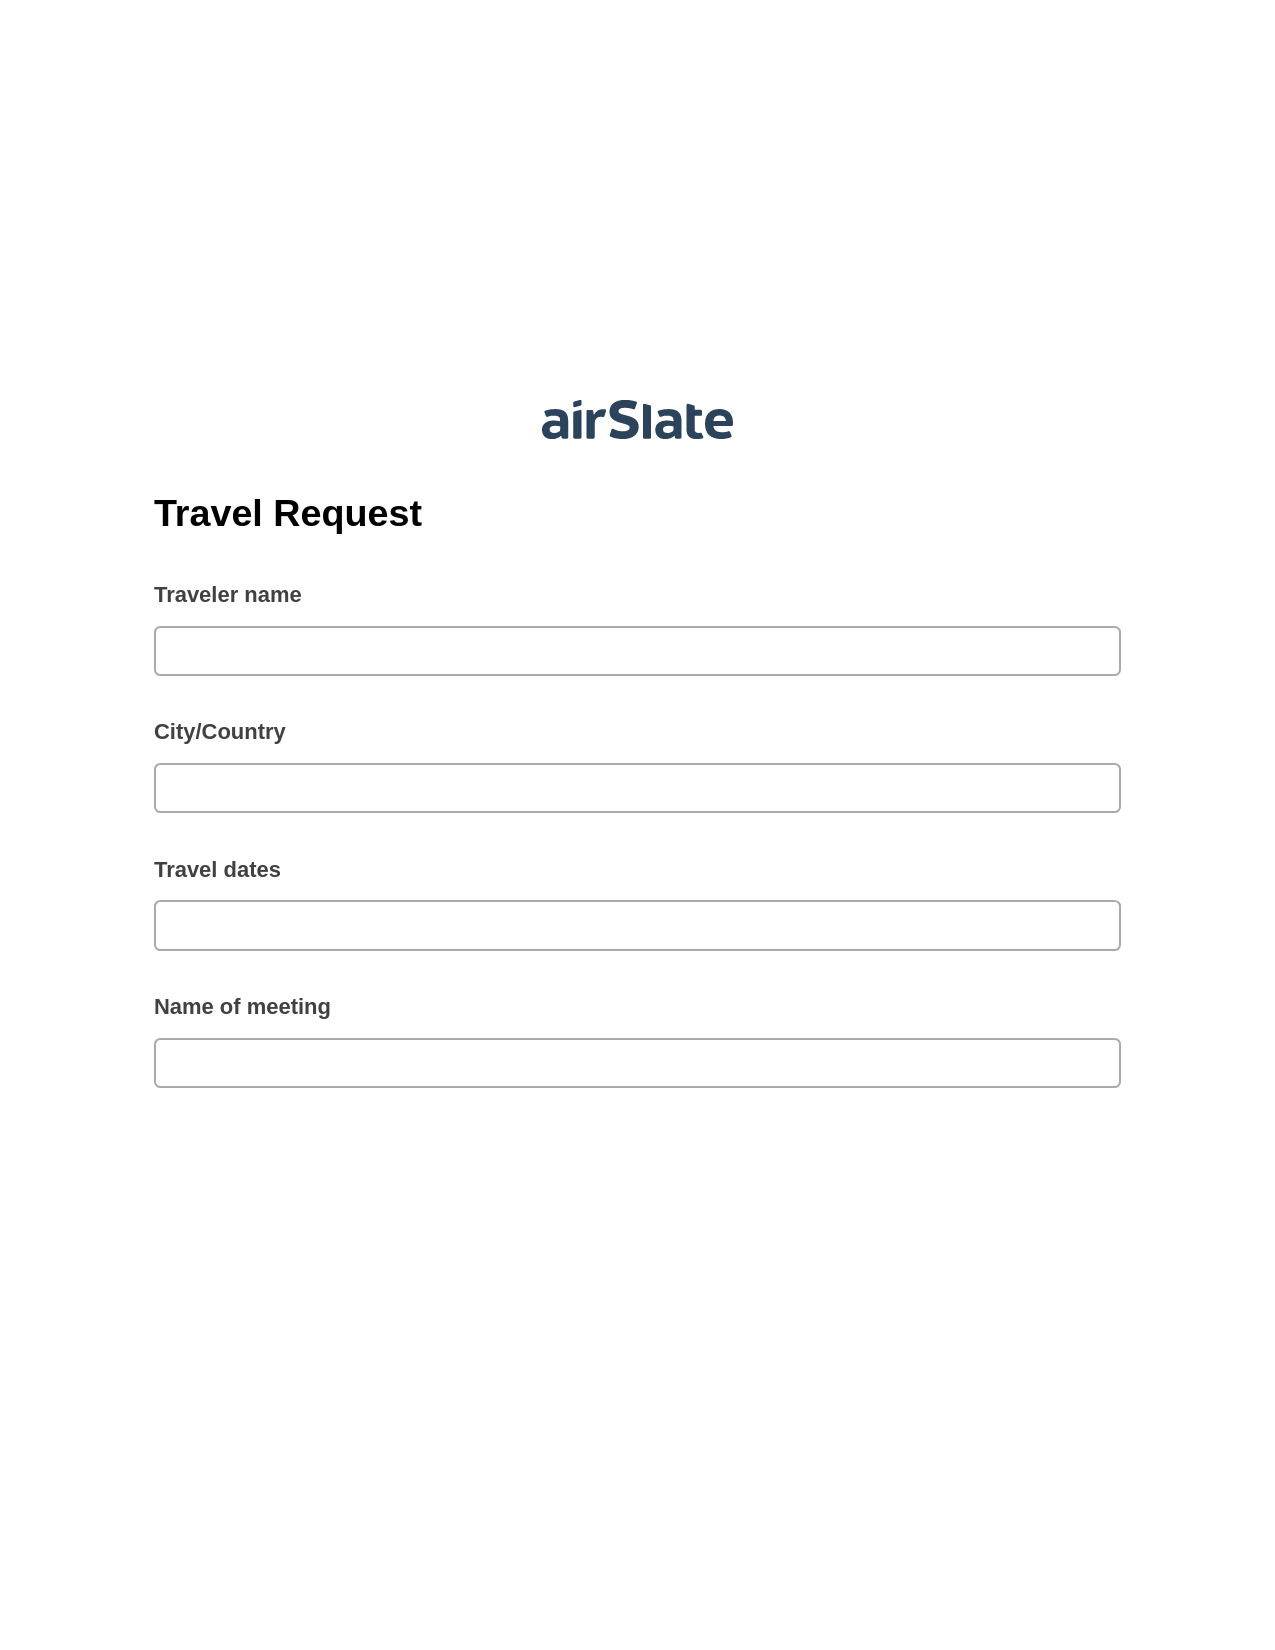 Travel Request Pre-fill from CSV File Bot, Jira Bot, Slack Two-Way Binding Bot